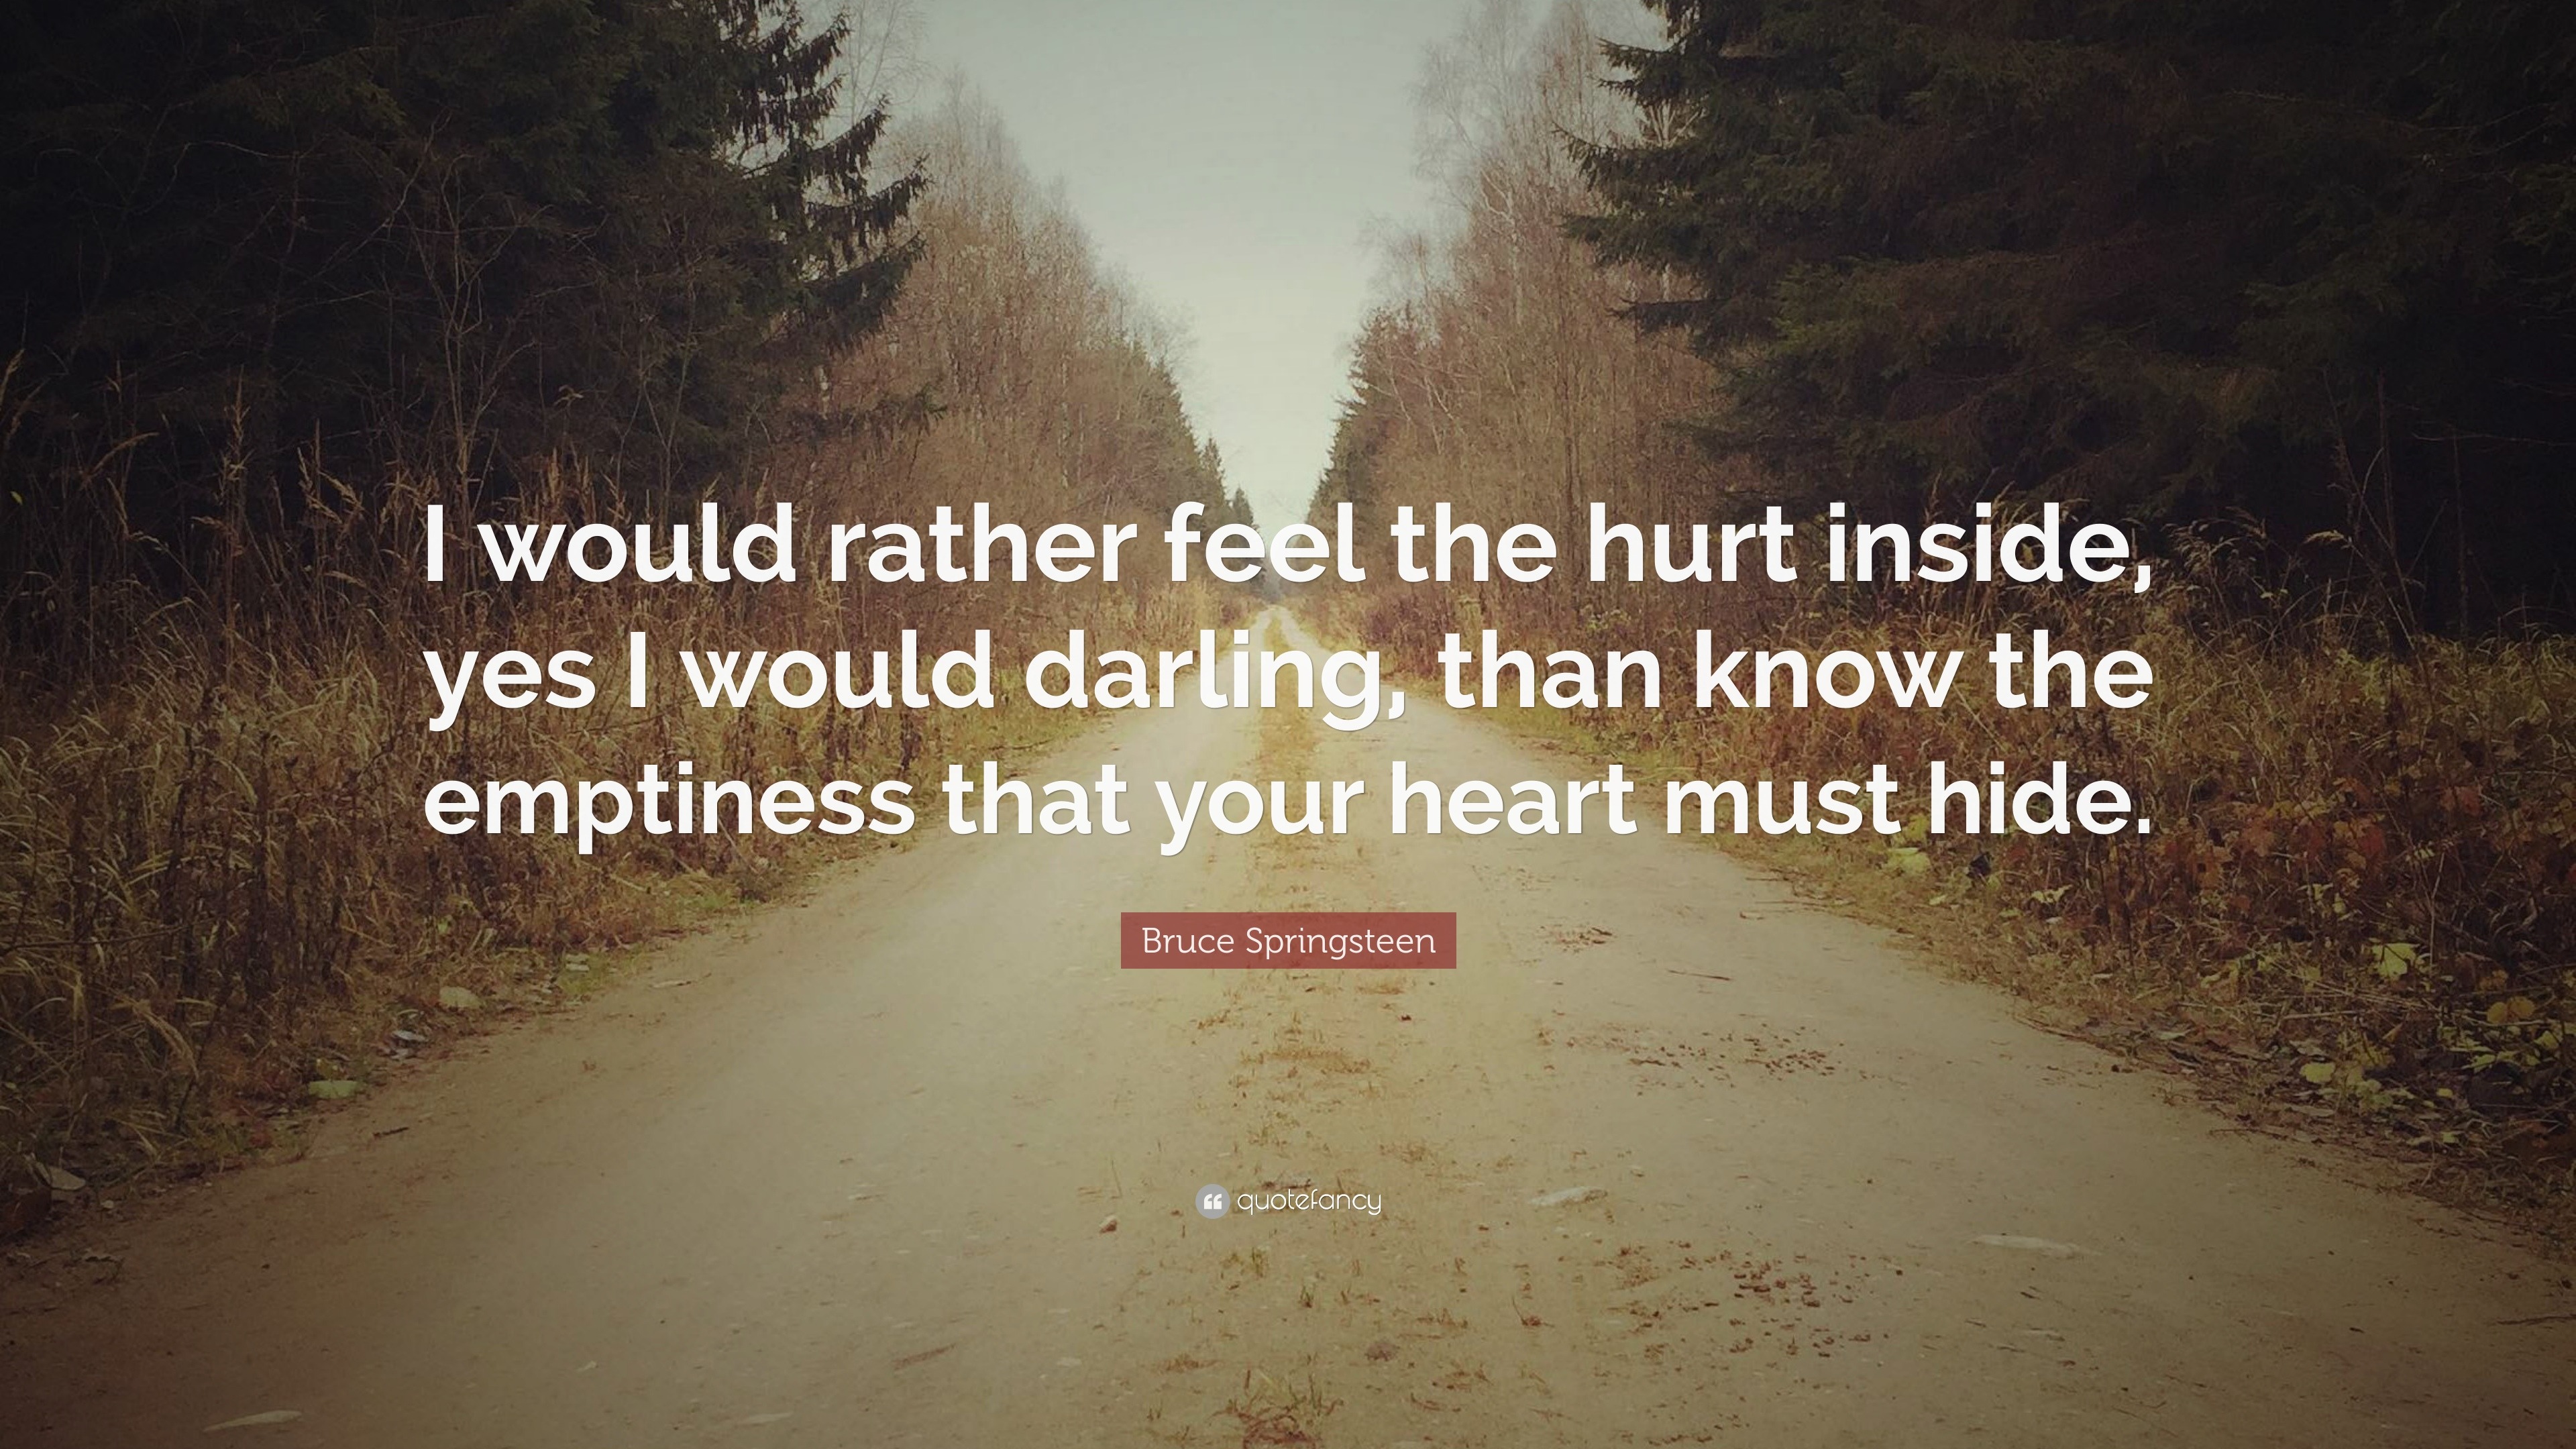 Bruce Springsteen Quote: “I would rather feel the hurt inside, yes I ...